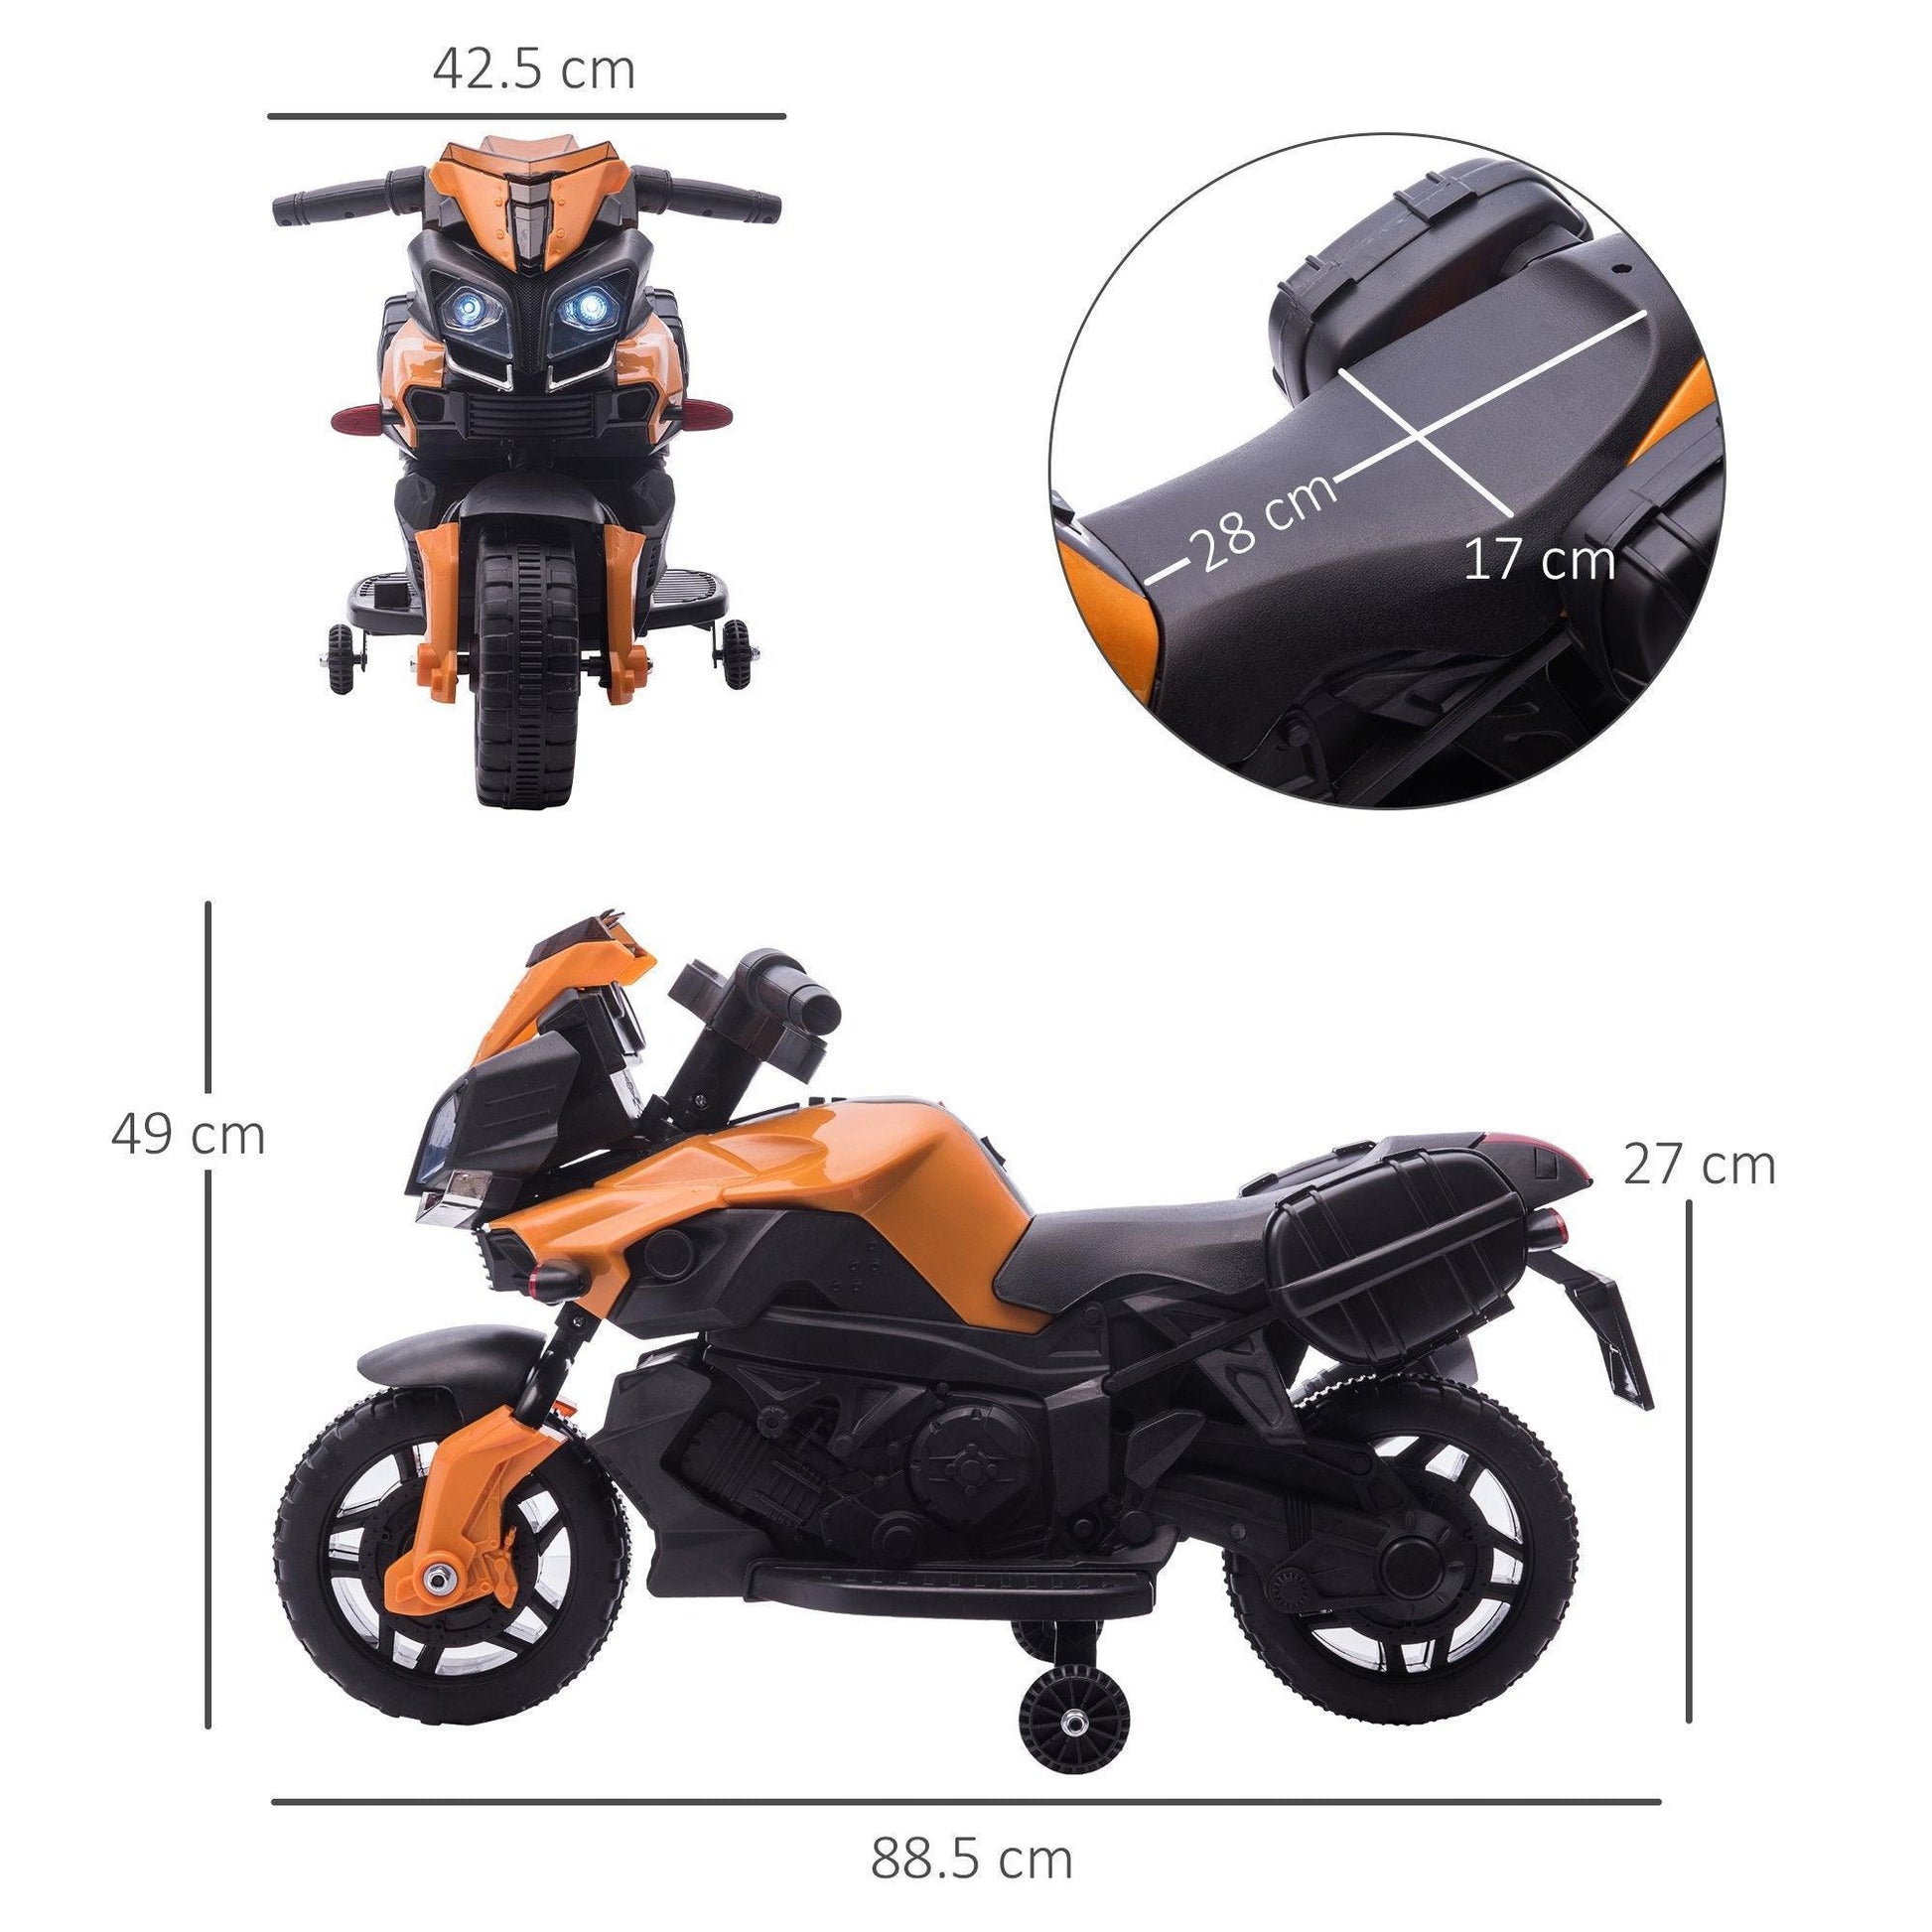 HOMCOMElectric Ride-On Motorcycle Toy for Kids - 6V, Rechargeable - ALL4U RETAILER LTD